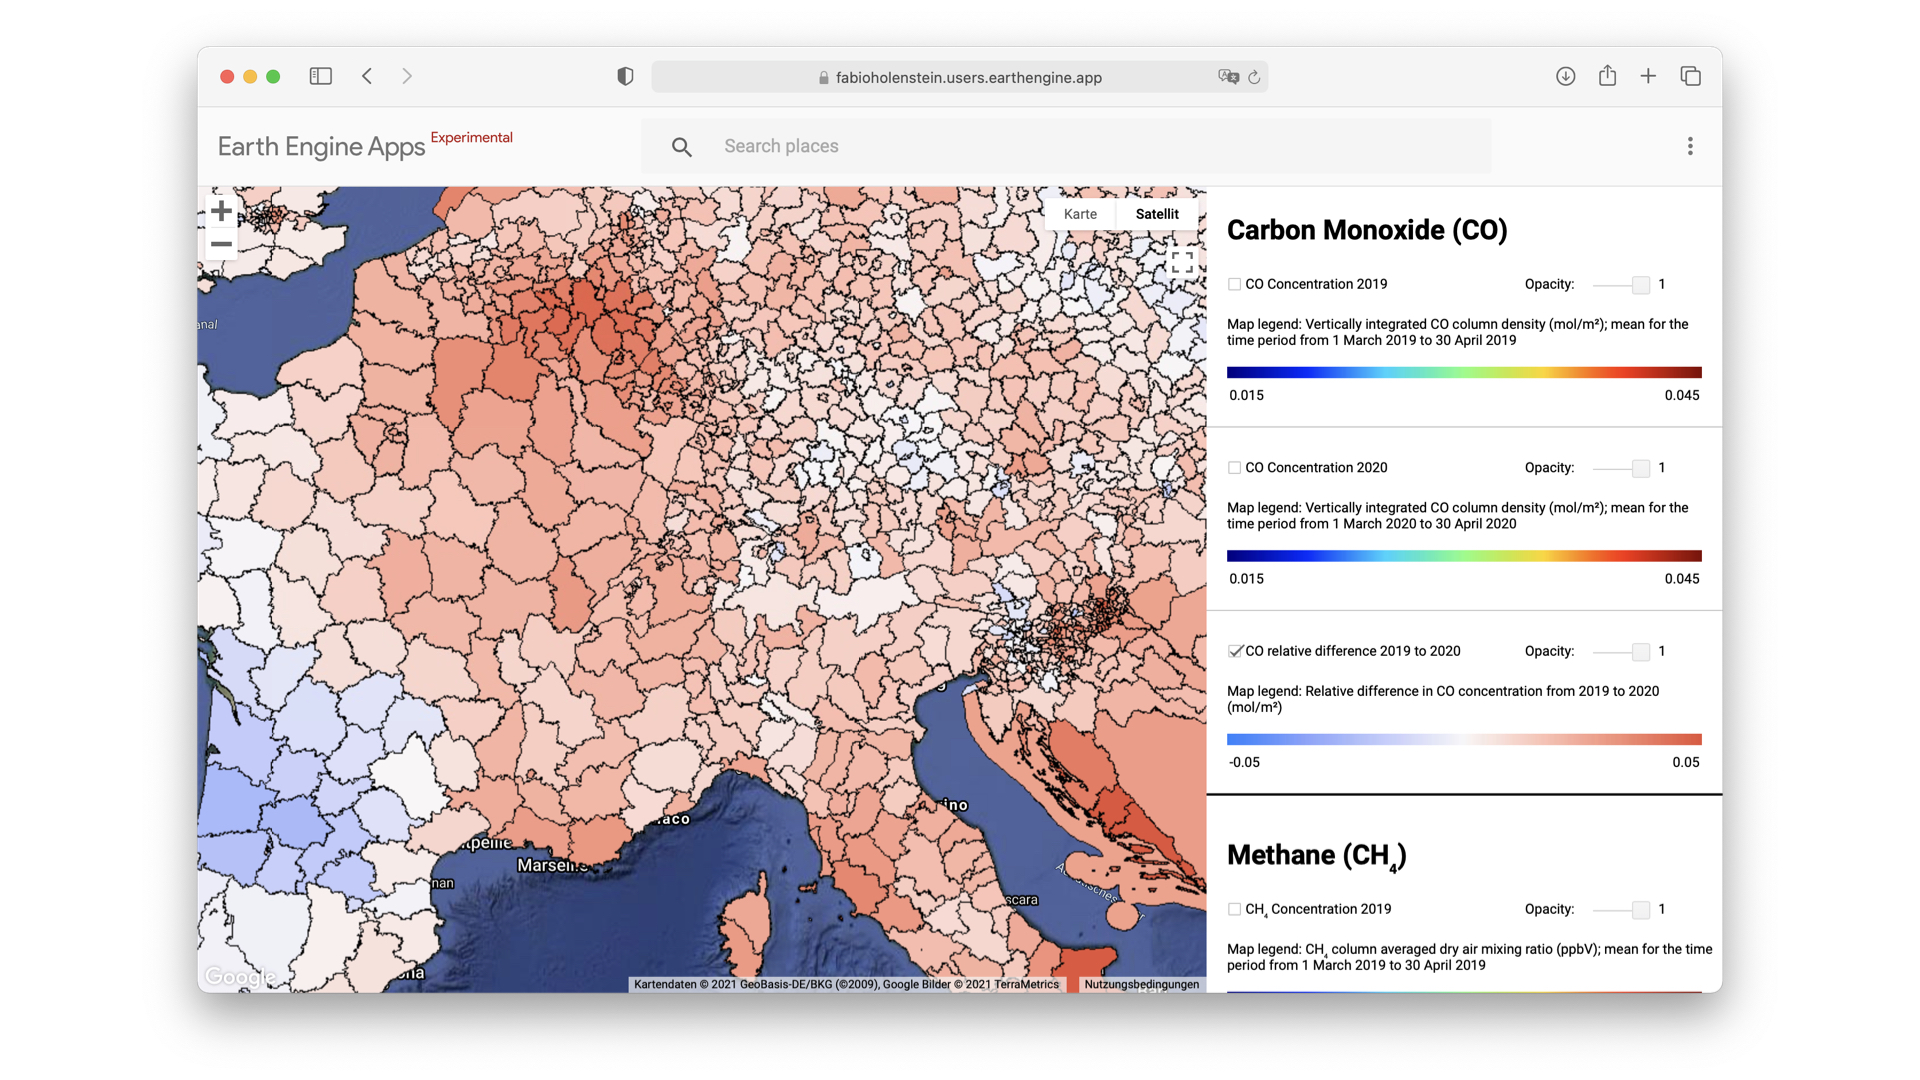 Visualization of the effects of the CoViD-19 pandemic on air pollution Europe. This app is available <a href='https://fabioholenstein.users.earthengine.app/view/anthropogenic-sources-of-air-pollution-in-europe'>online</a>.